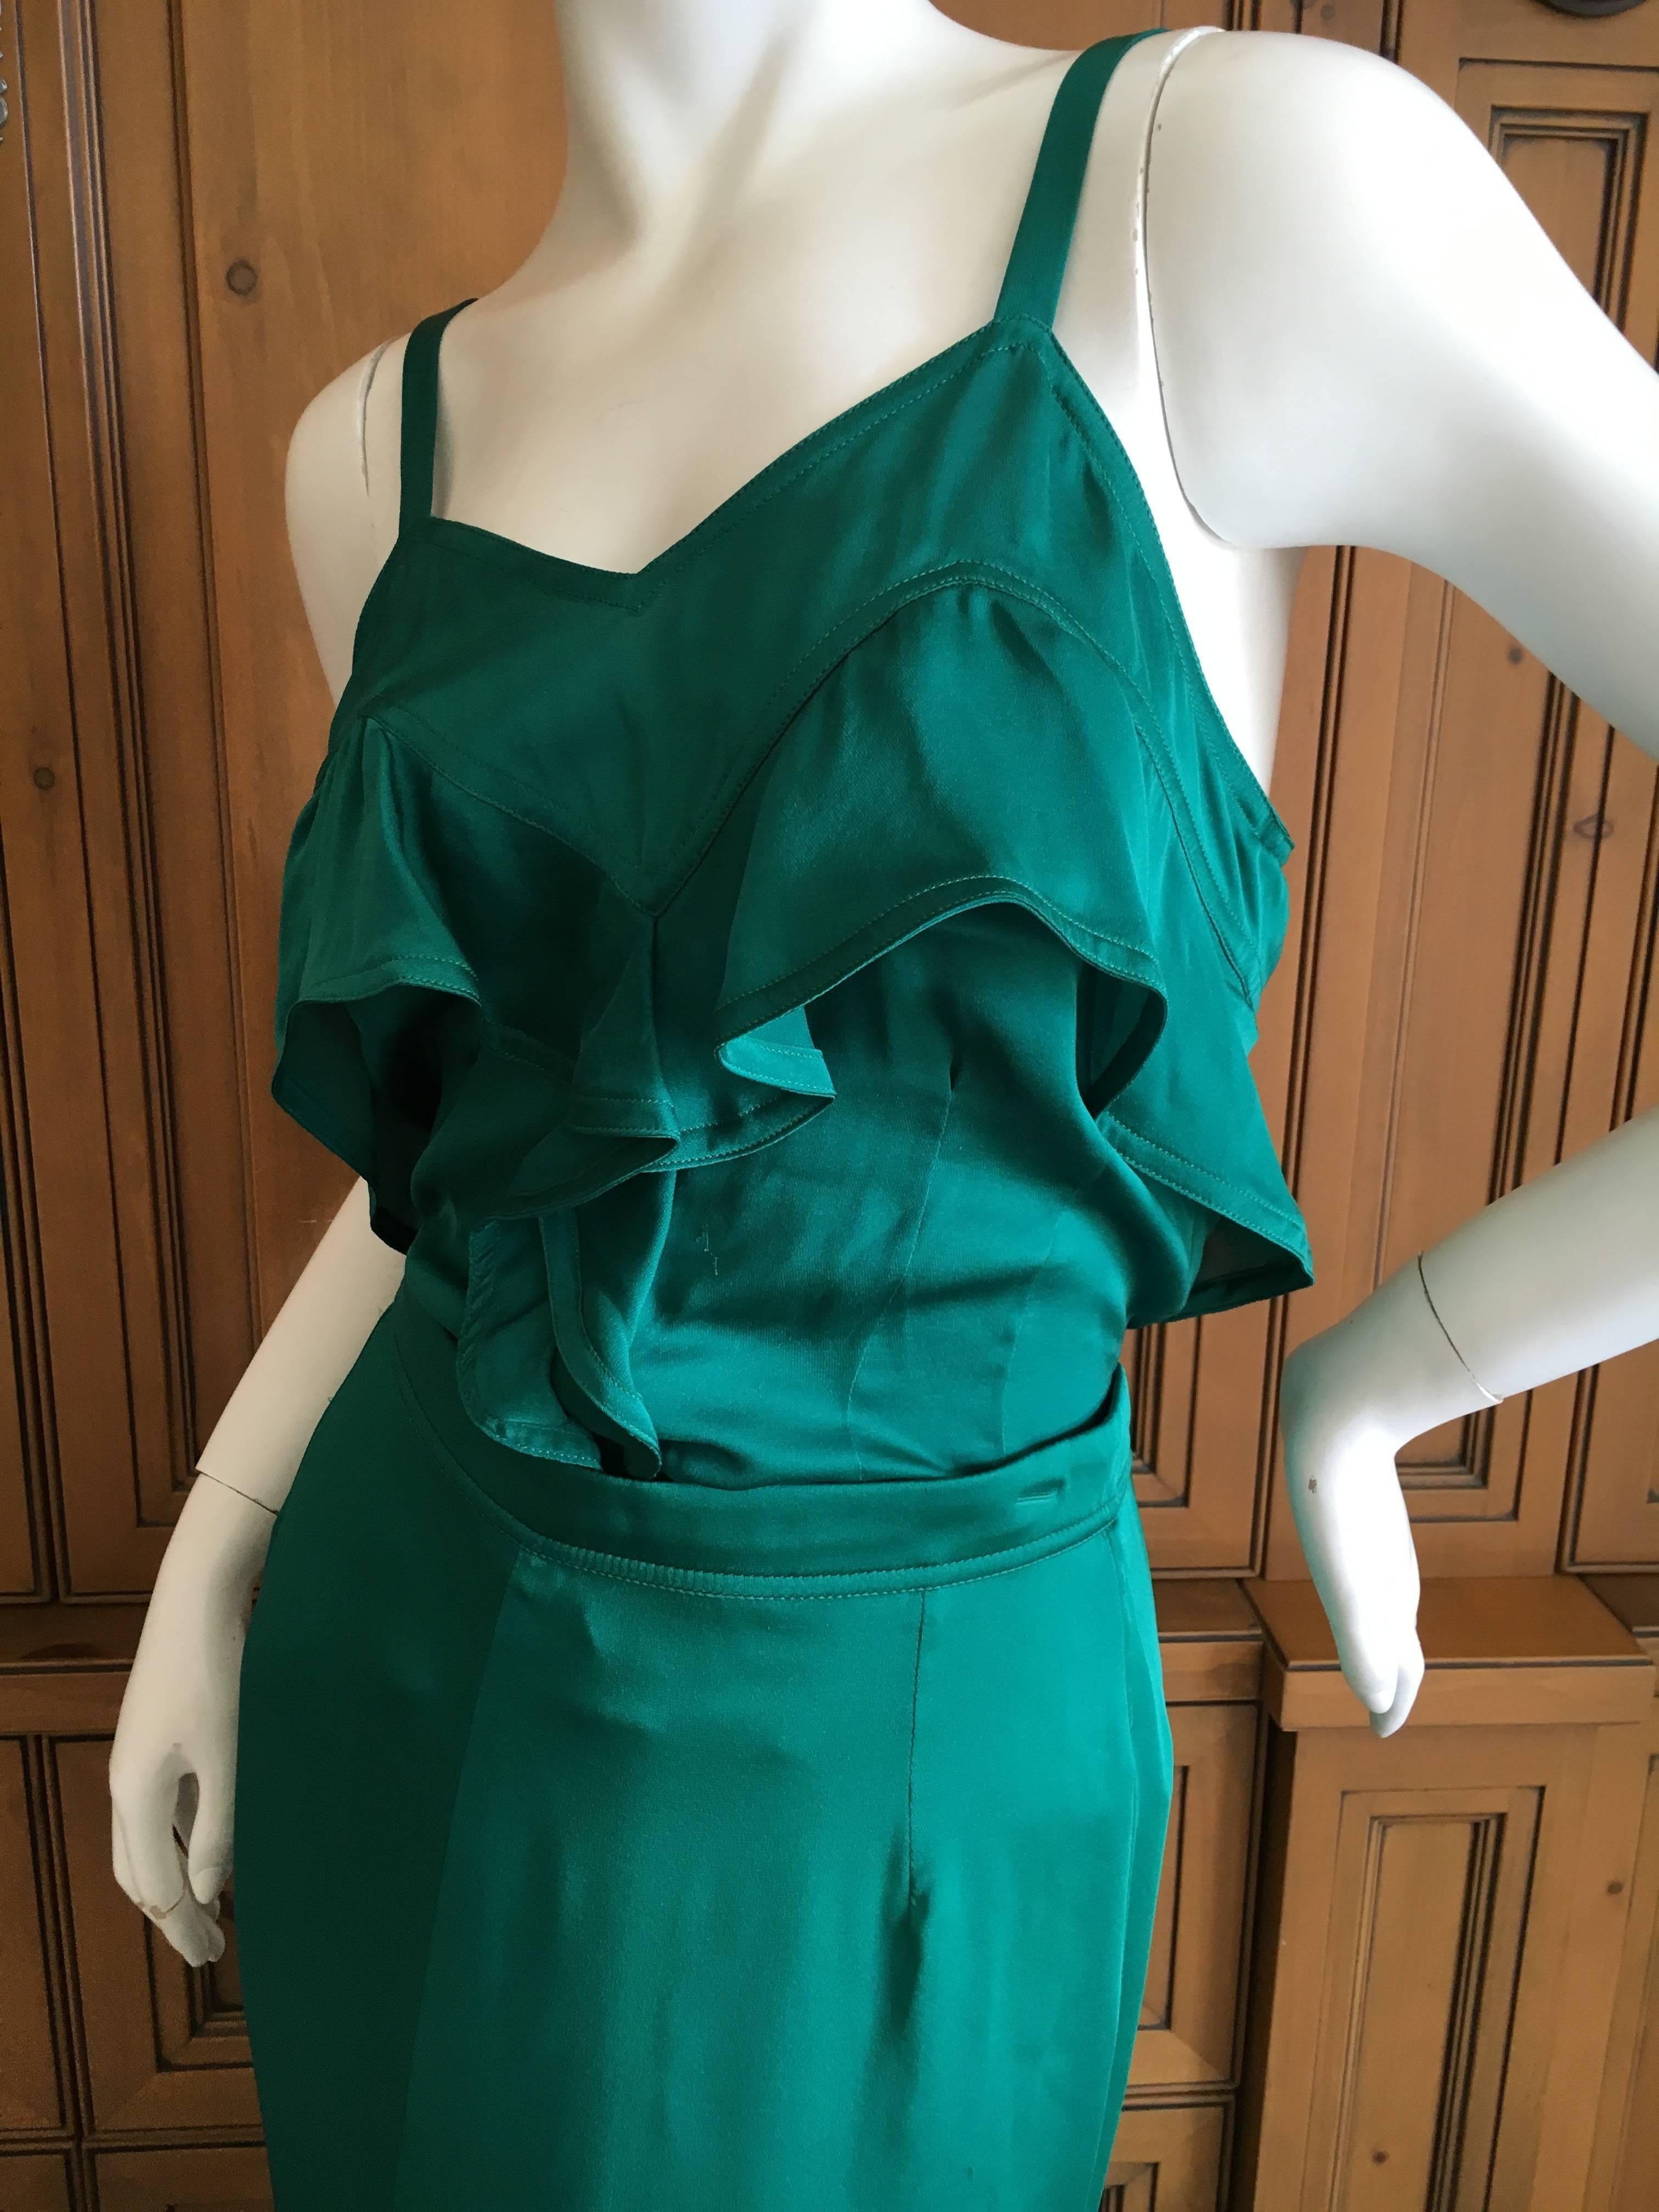 Blue Yves Saint Laurent by Tom Ford 2003 Two Piece Ruffled Silk Dress New with Tags For Sale